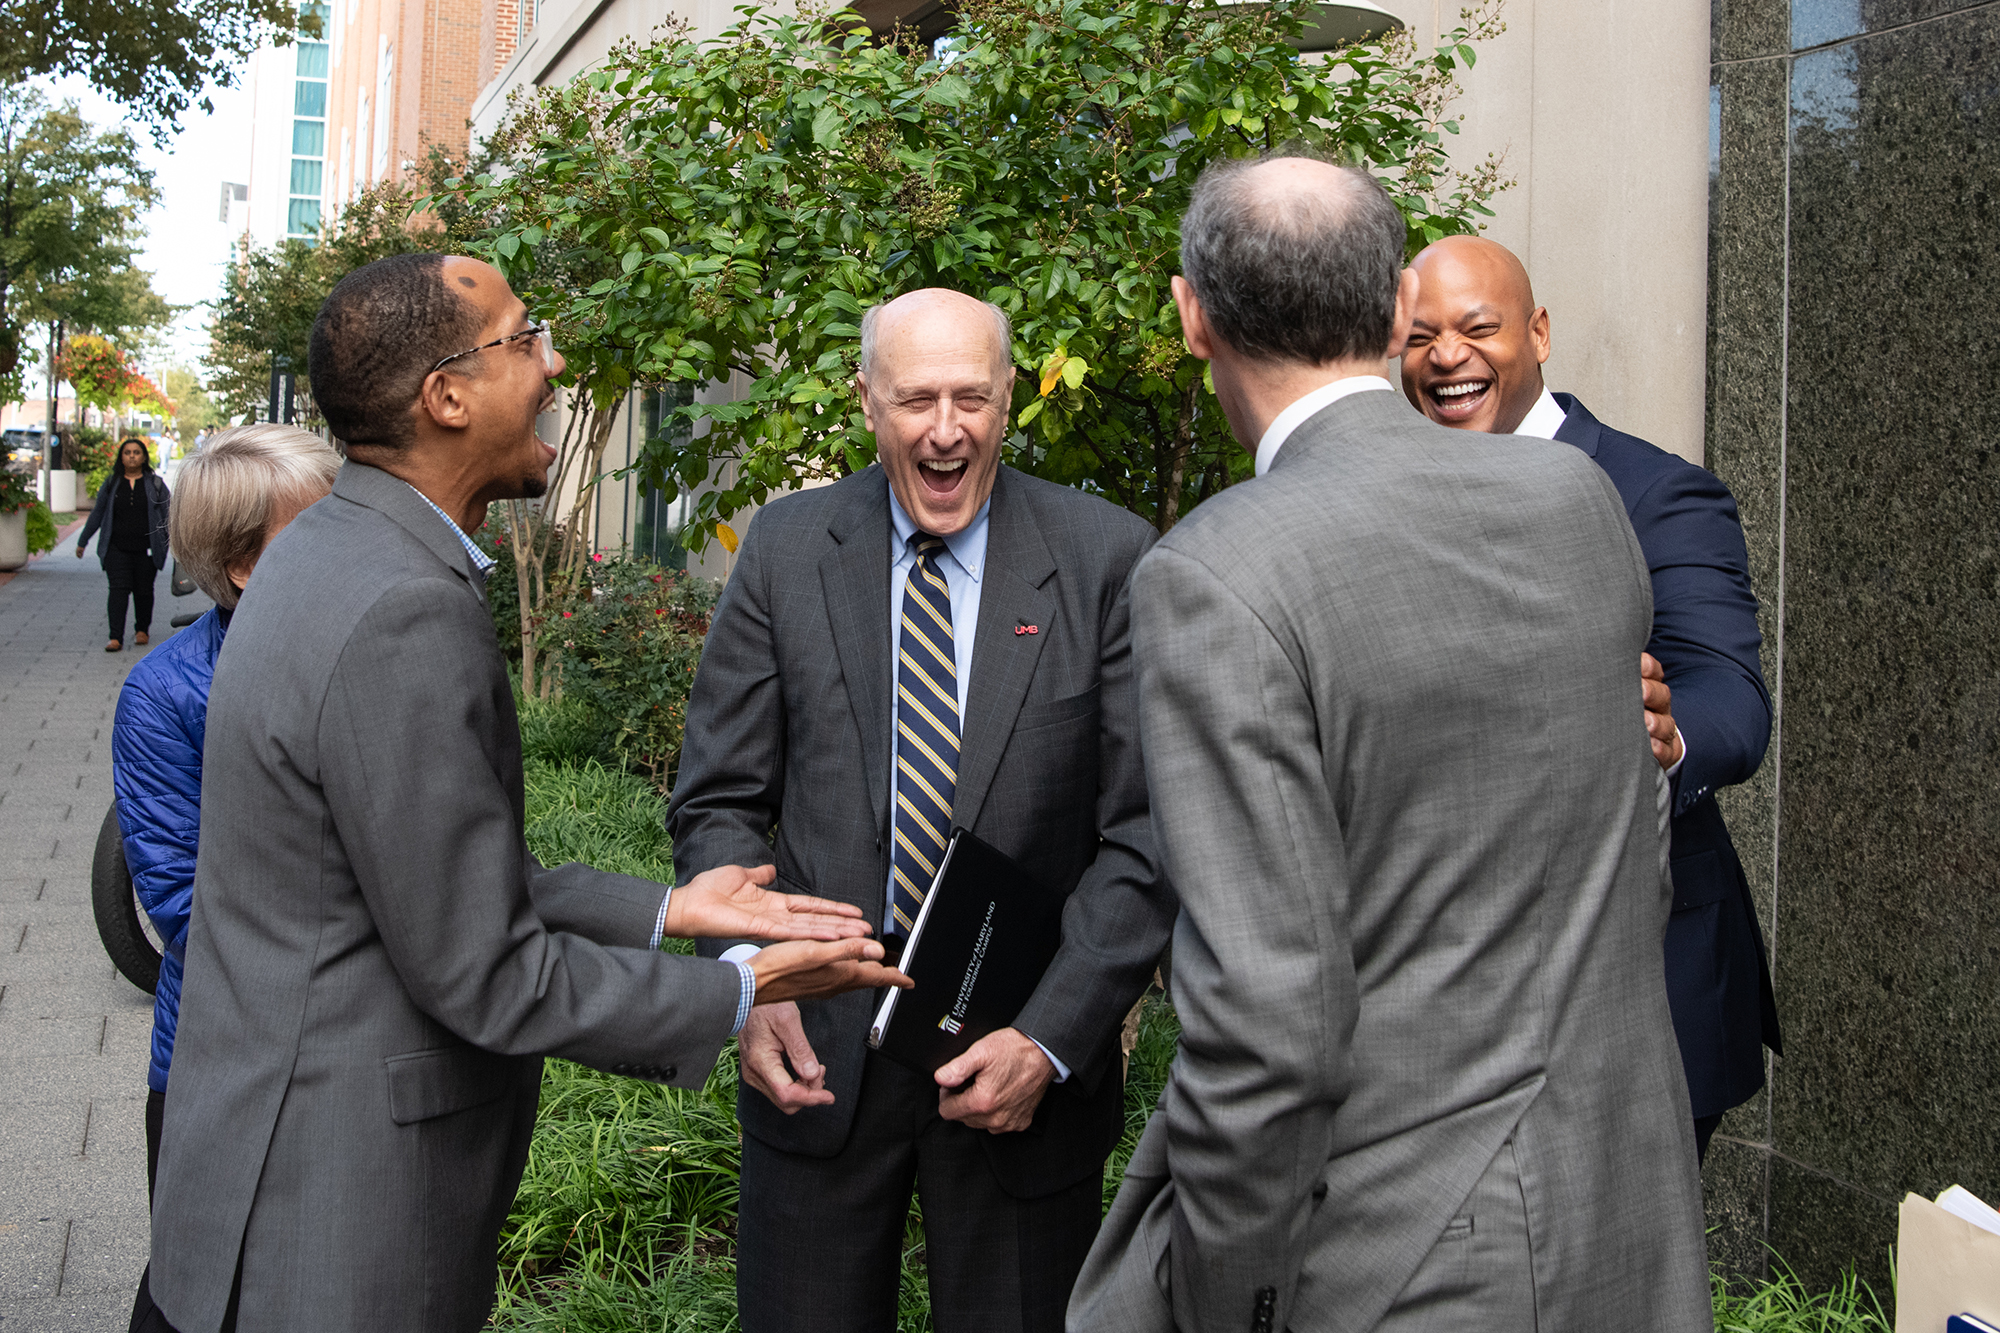 UMB President Bruce Jarrell and others are surprised by Gov. Wes Moore (right) as he arrives to spend part of his day at the UM BioPark